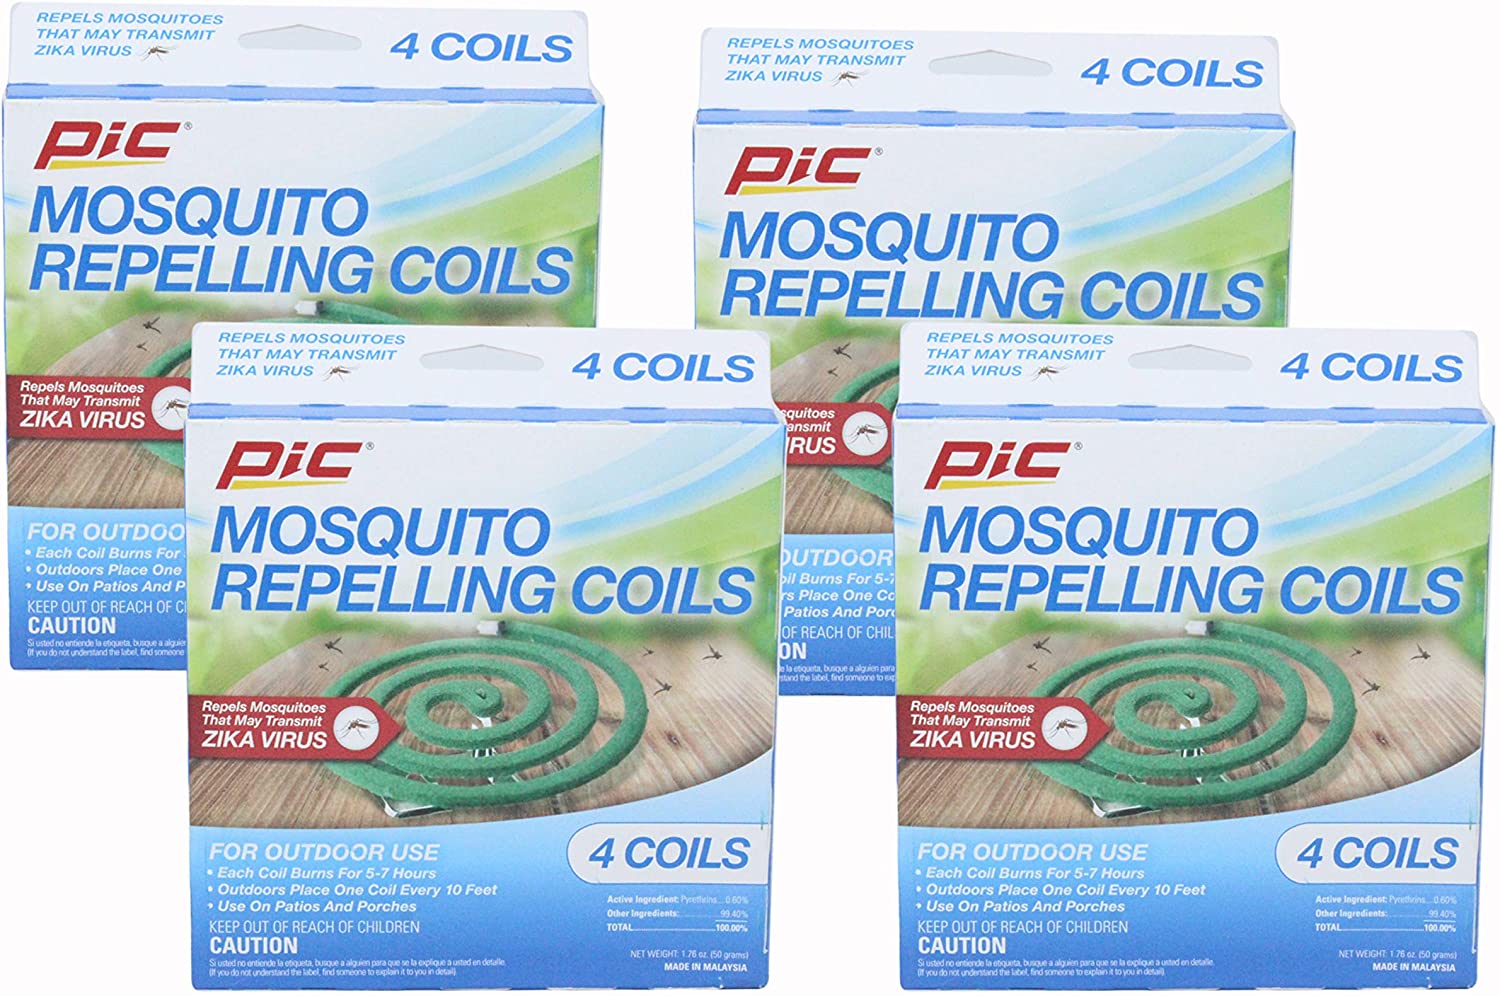 1. PIC Mosquito-Repelling Coils for Outdoor Spaces